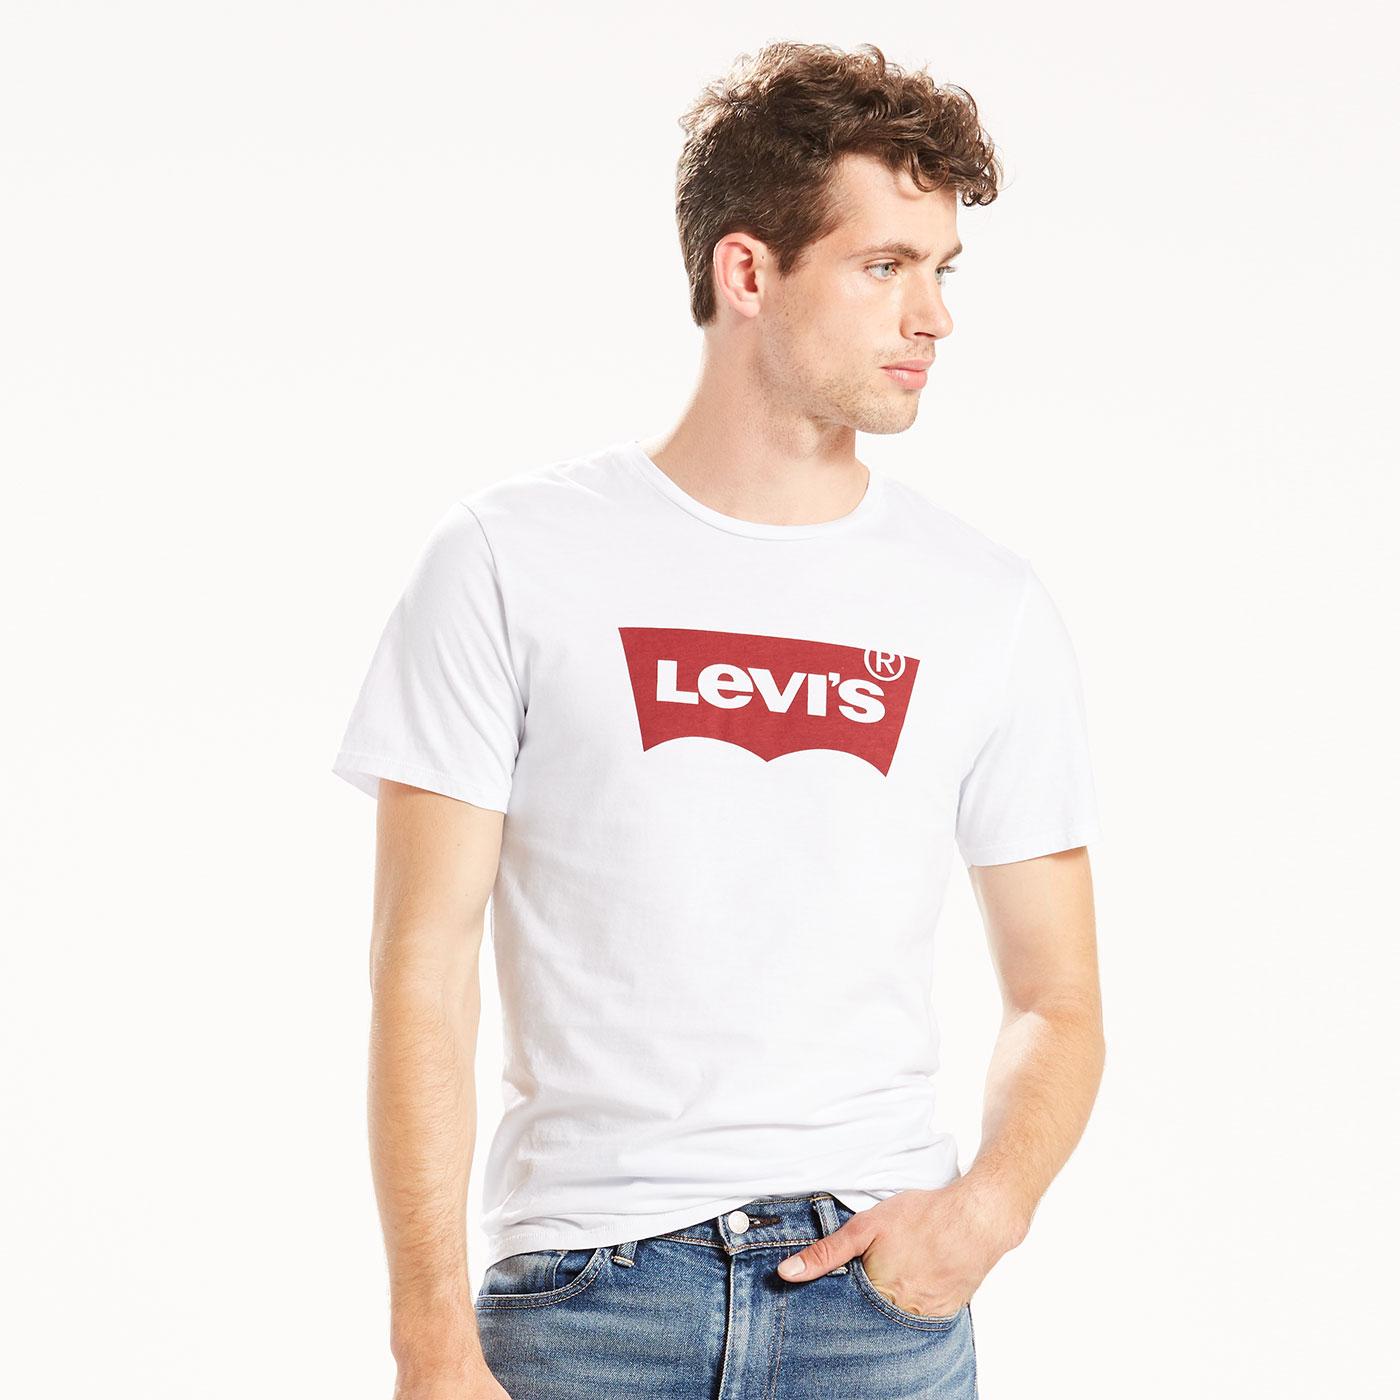 levi's red and white t shirt